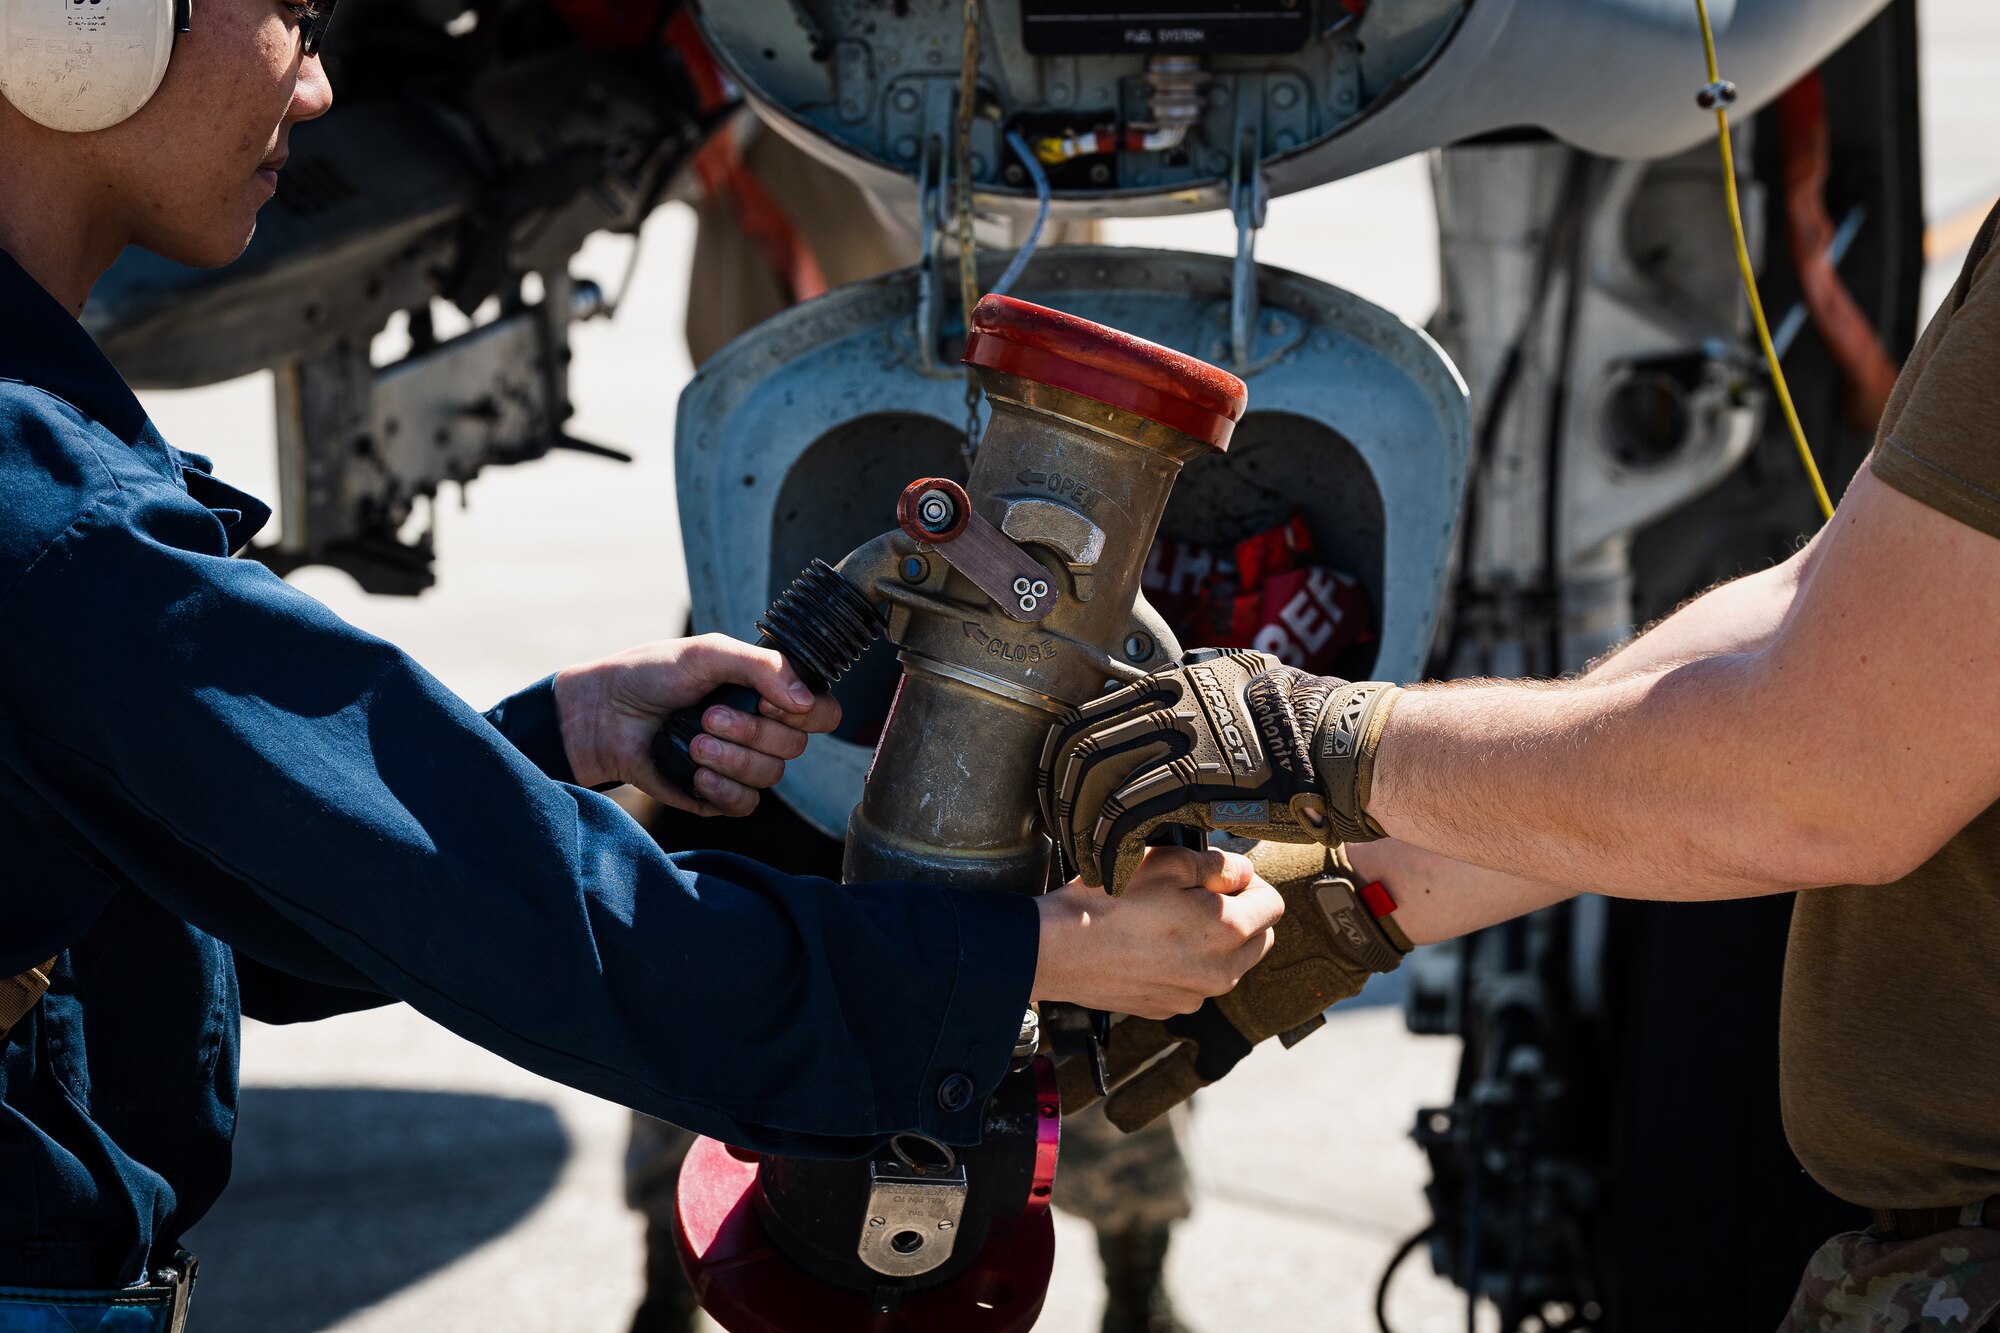 A photo of an Airman passing a fuel hose to another Airman